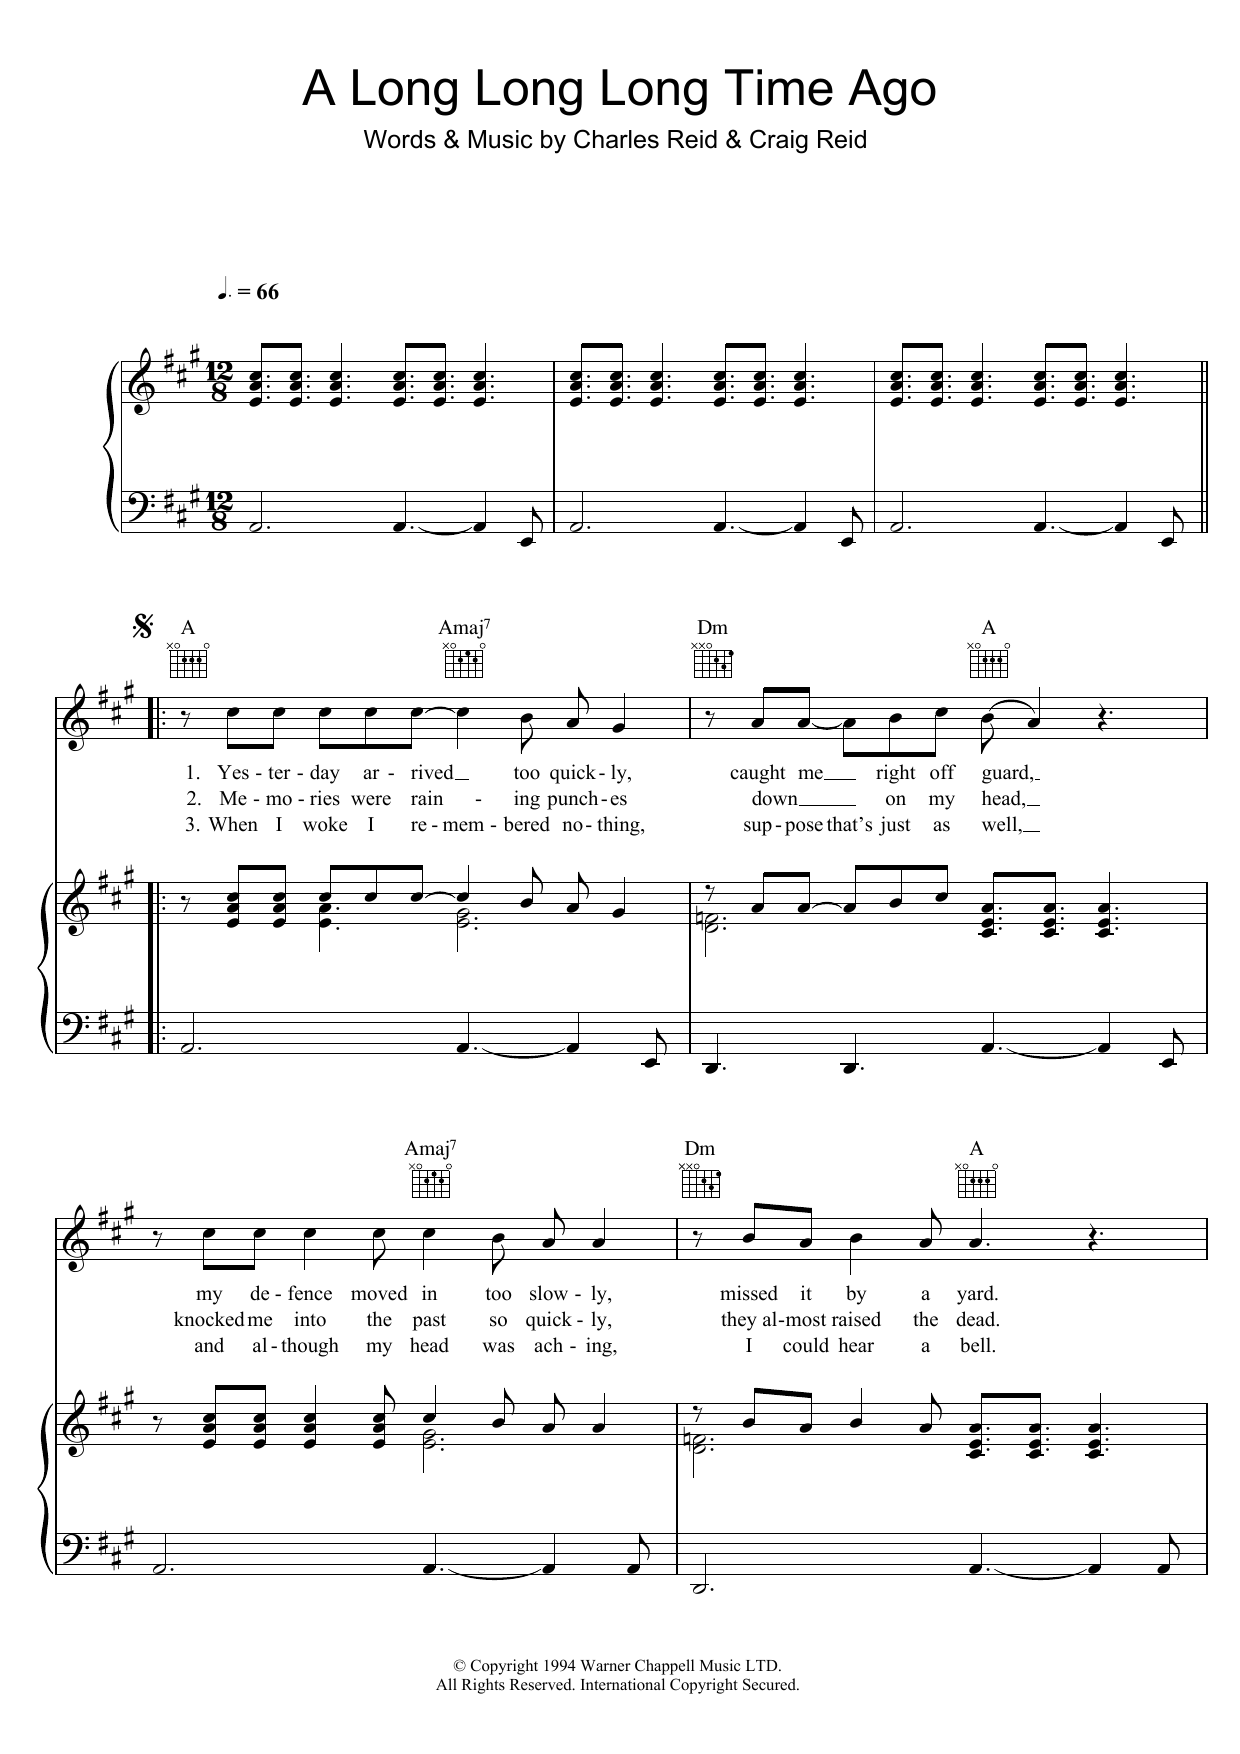 Download The Proclaimers A Long Long Long Time Ago Sheet Music